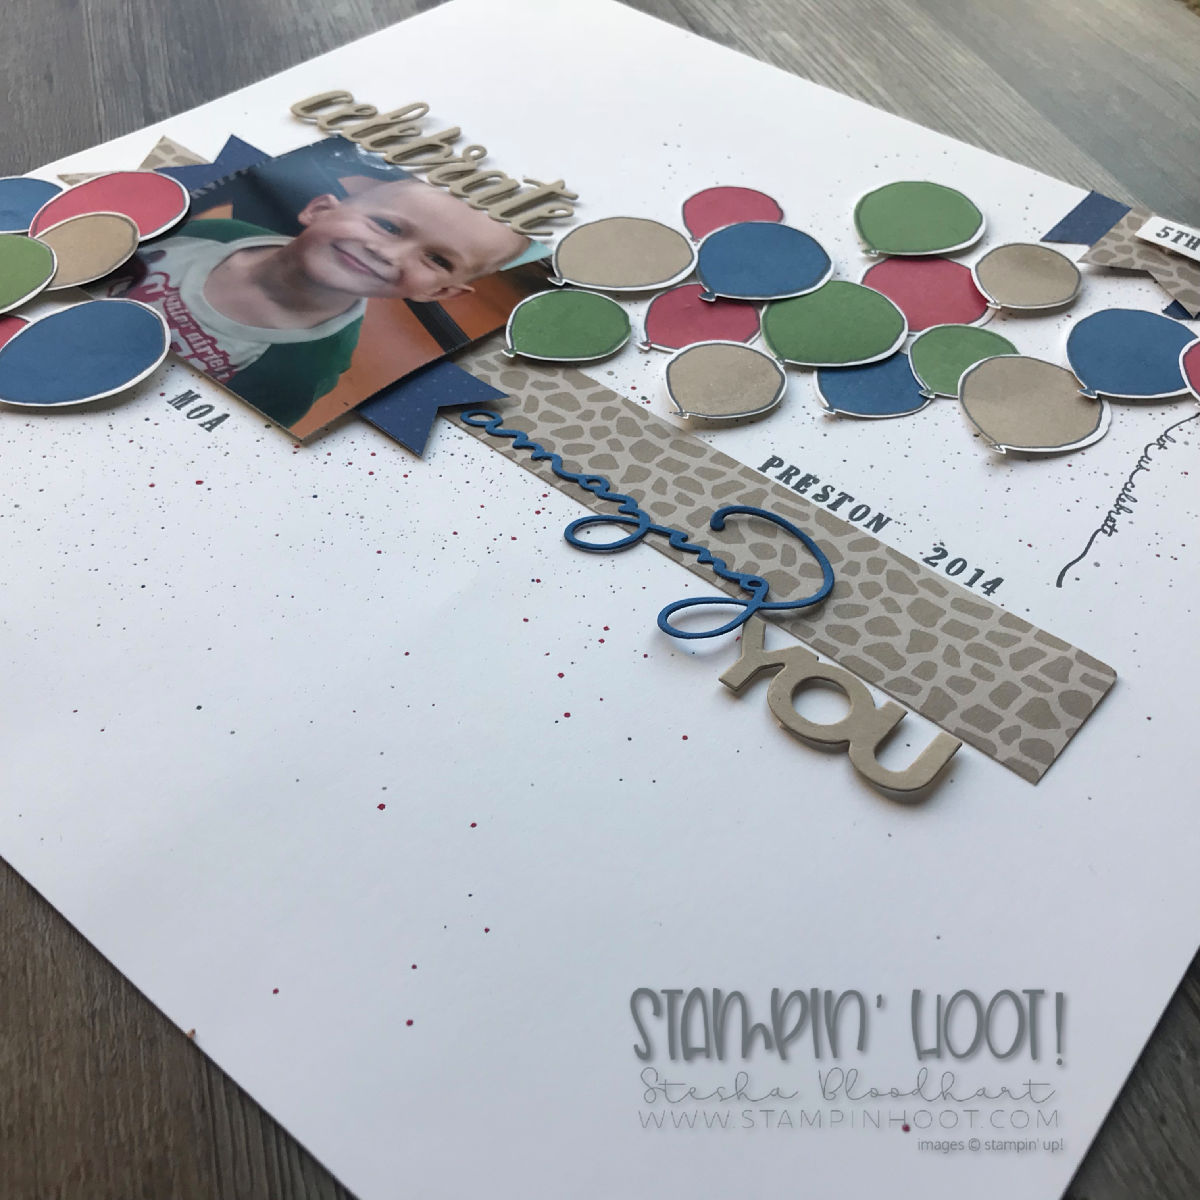 Celebrate Amazing You Scrapbook Page for the Scrapbooking Global Blog Hop October 2018 Scrapbook Page by Stesha Bloodhart, Stampin' Hoot!